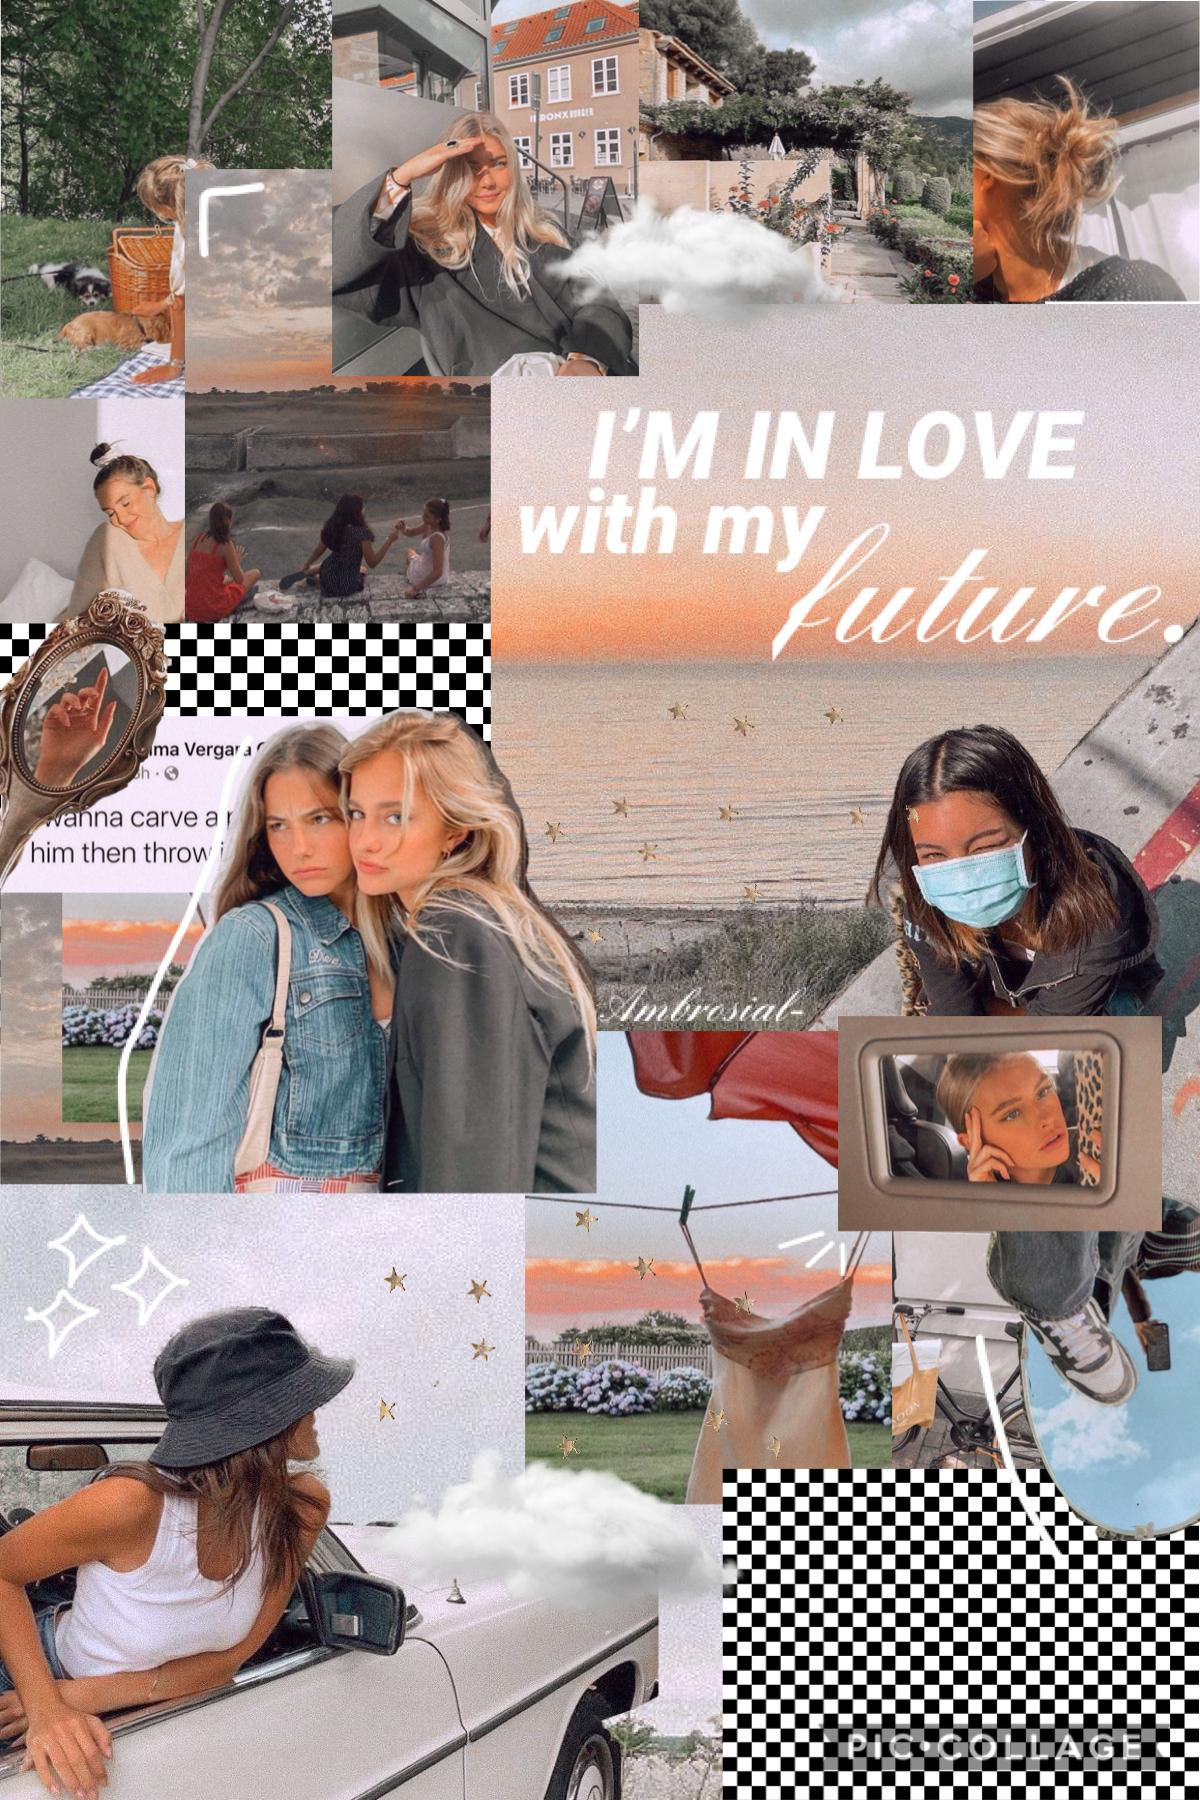 tap 🧡 25/9 
hasfhth my collage got deleted 🥺 but I JUST FINISHED MY ASSESSMENTS FOR THE TERM AND I MADE THIS COLLAGE AND I’M HOPEFULLY GOING TO BE ACTIVE FOR AT LEAST THE NEXT TWO WEEKS!! 💗💗💗